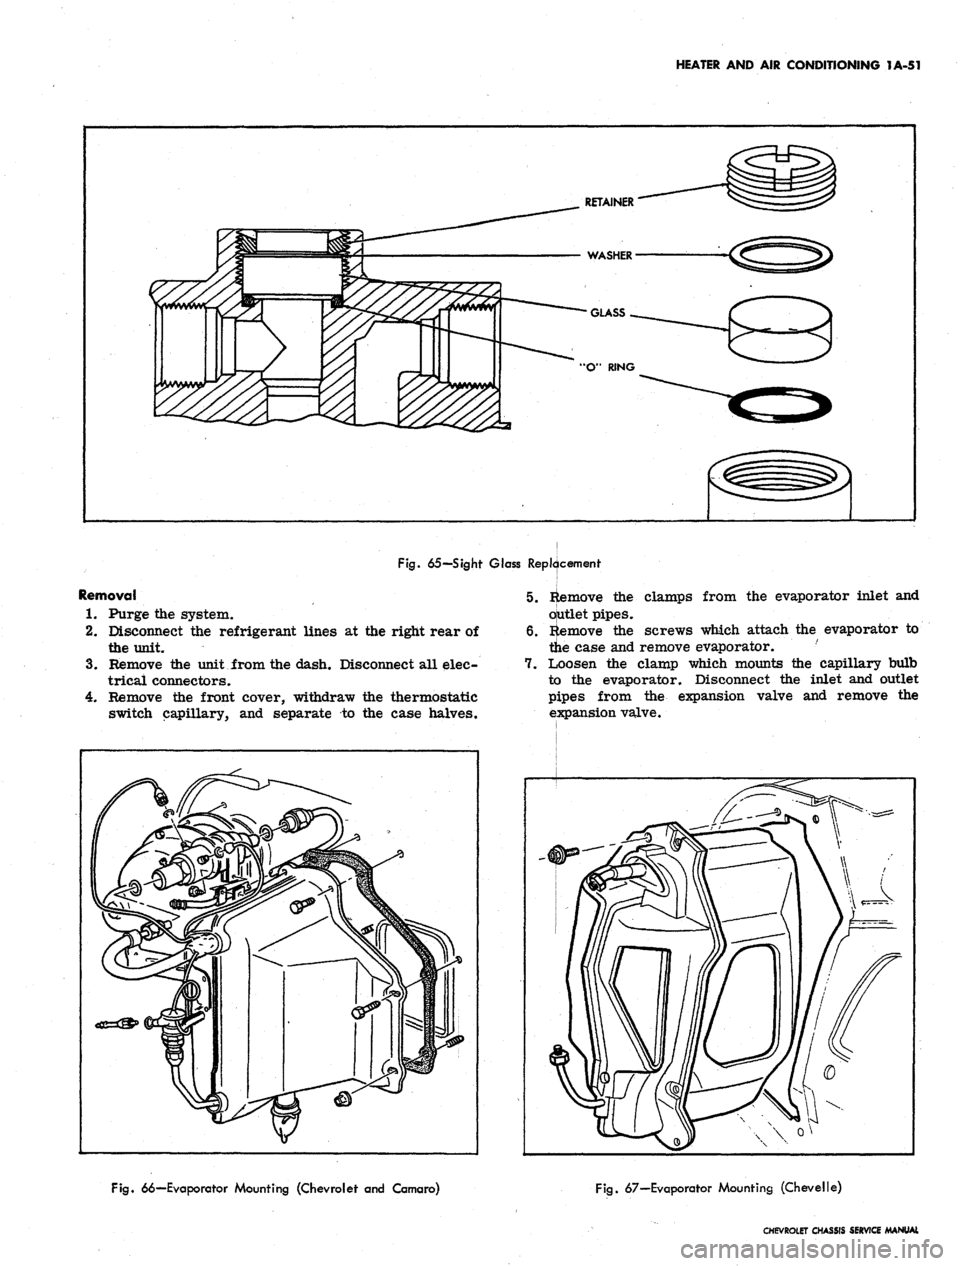 CHEVROLET CAMARO 1967 1.G Chassis Workshop Manual 
HEATER AND AIR CONDITIONING 1A-51

RETAINER

WASHER

GLASS

•O"
 RING

Fig.
 65-Sight Glass Replacement

Removal

1.
 Purge the system.

2.
 Disconnect the refrigerant lines at the right rear of

t